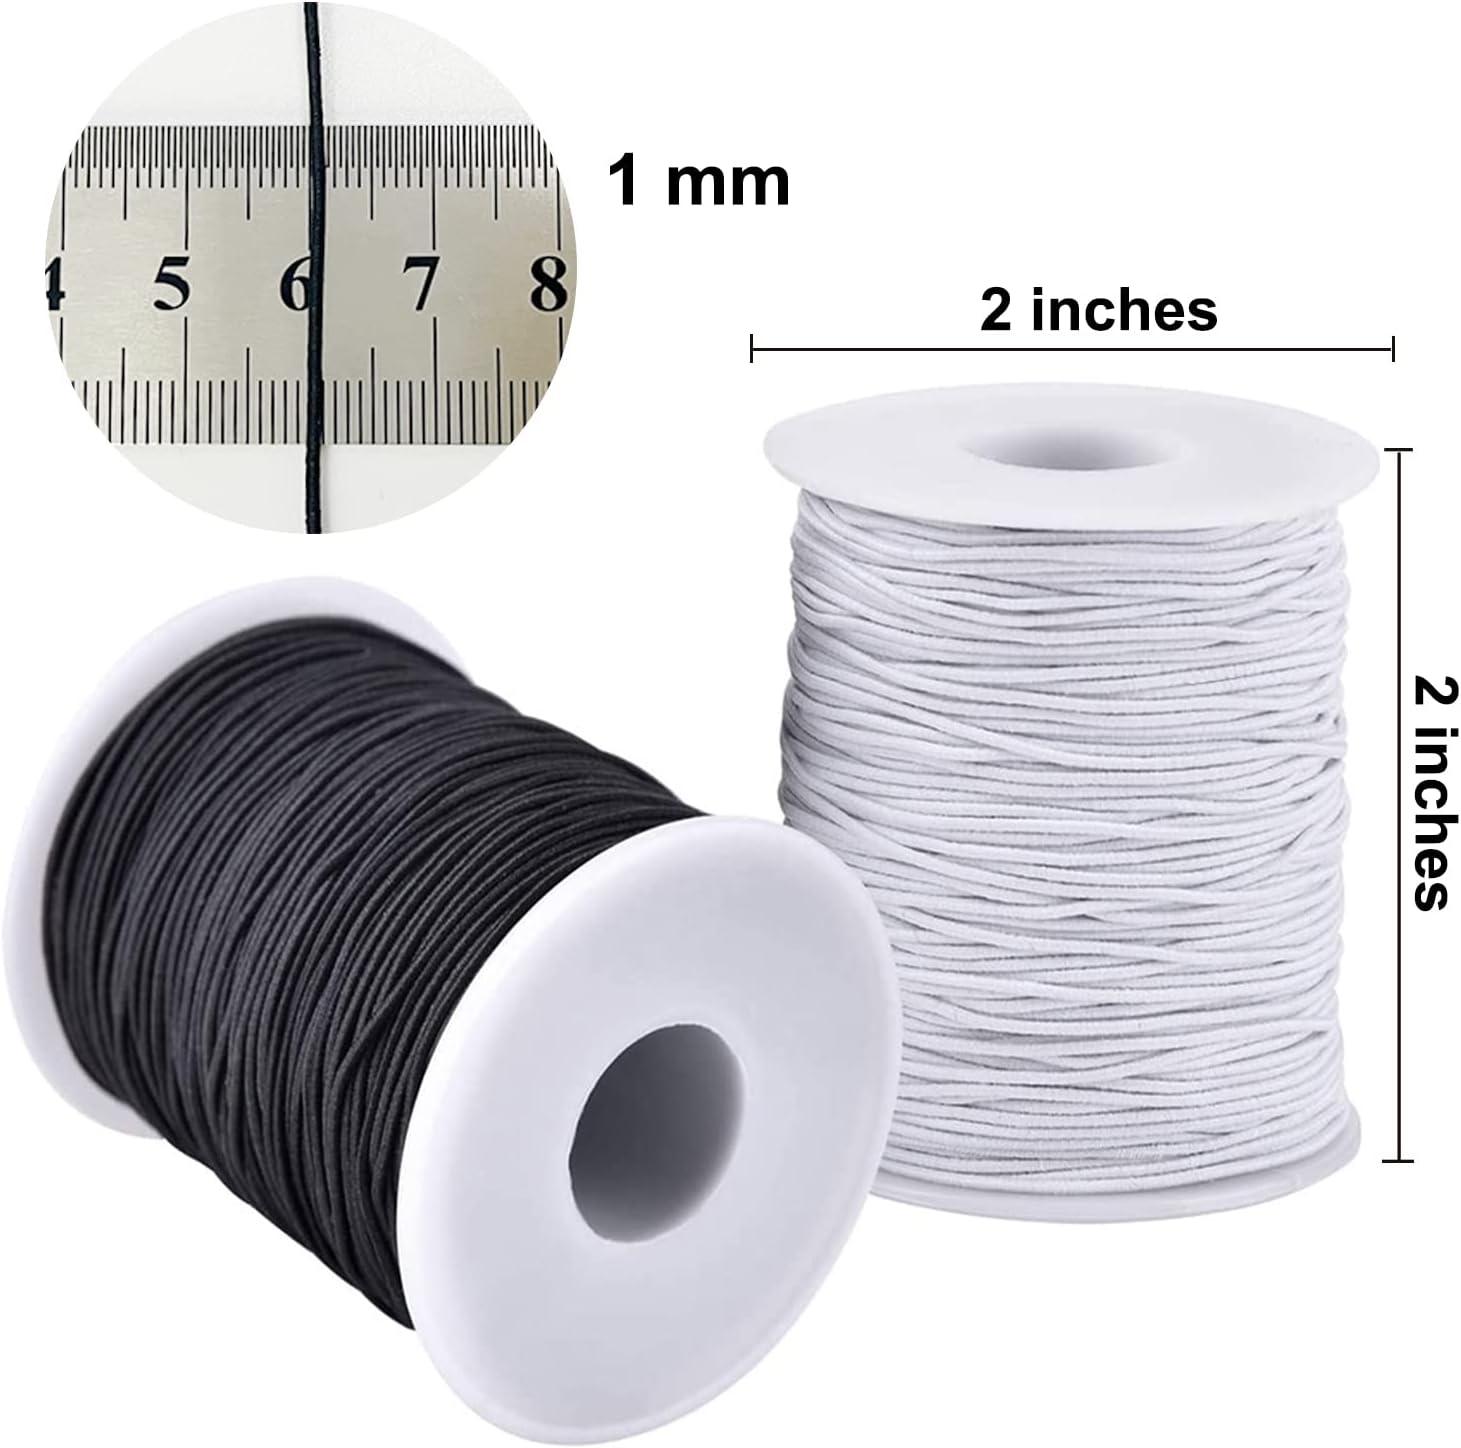 Bupete 1mm elastic stretch string, 4 rolls clear beading string with 2  sizes beading needles, yarn